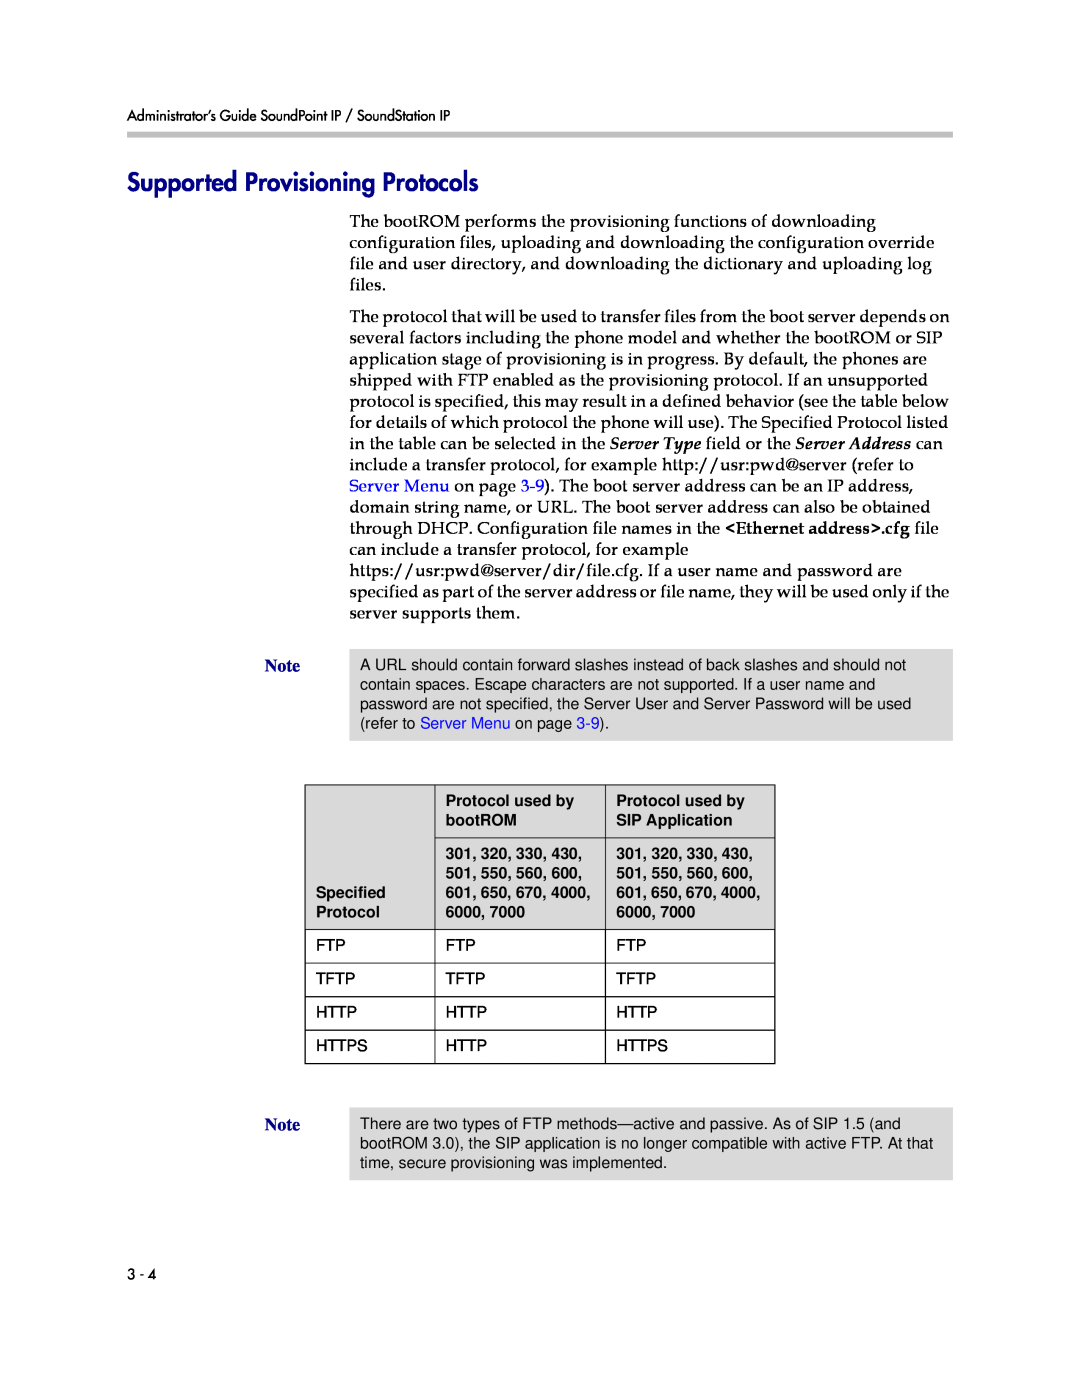 Polycom SIP 3.1 manual Supported Provisioning Protocols 